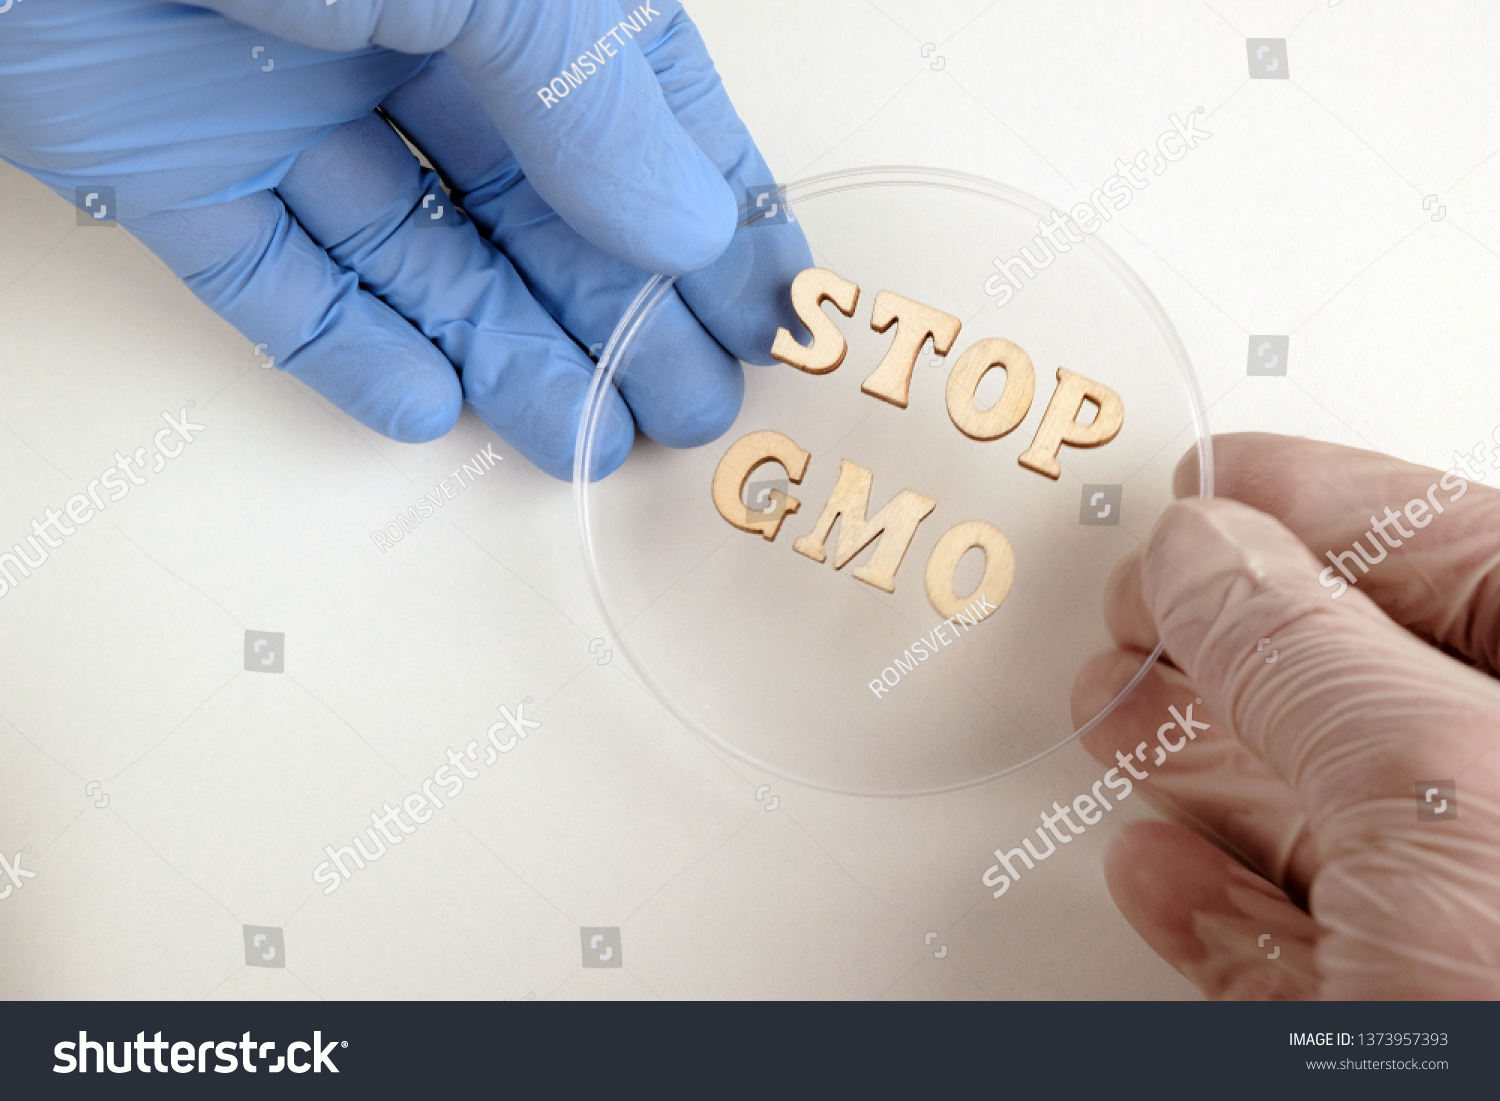 STOP GMO from wooden letters.One hand in a white medical glove and the other in a blue lab glove together hold a petri dish.Concept of protest, prohibition of experiments on genetic food modification. #1373957393